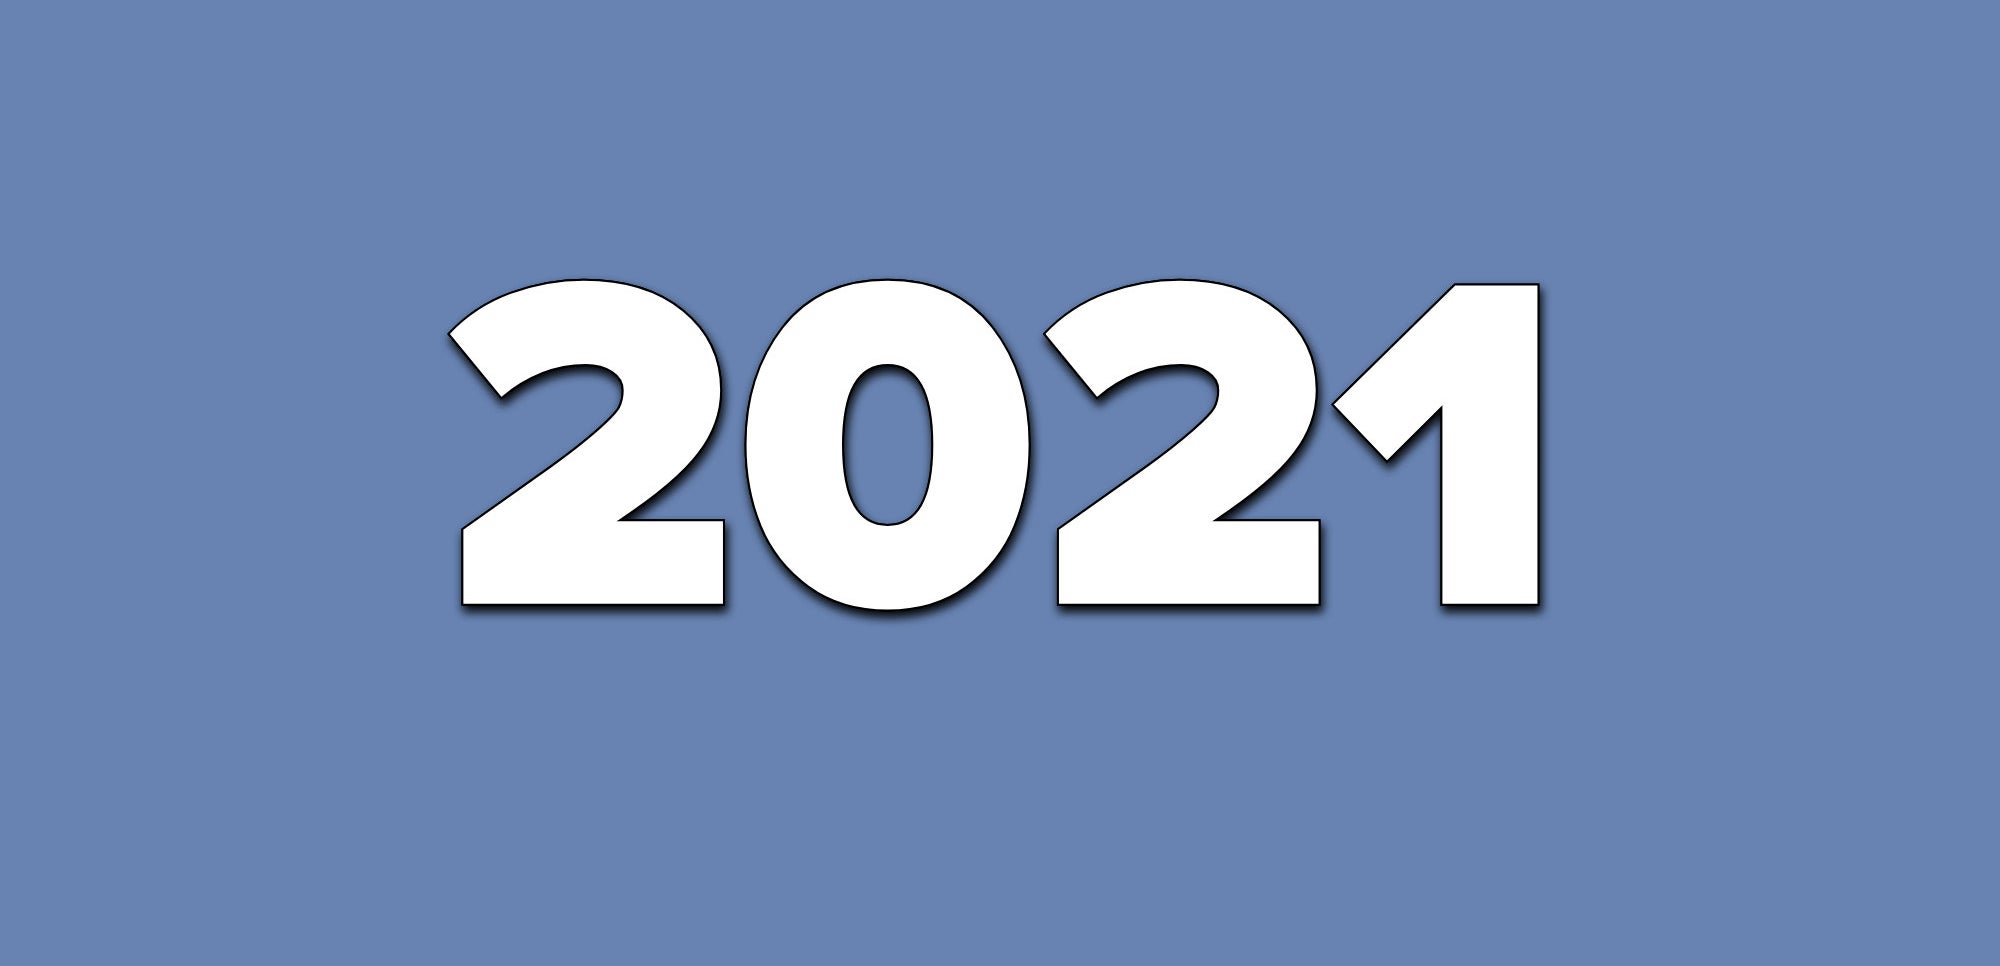 A blue background with text that says 2021